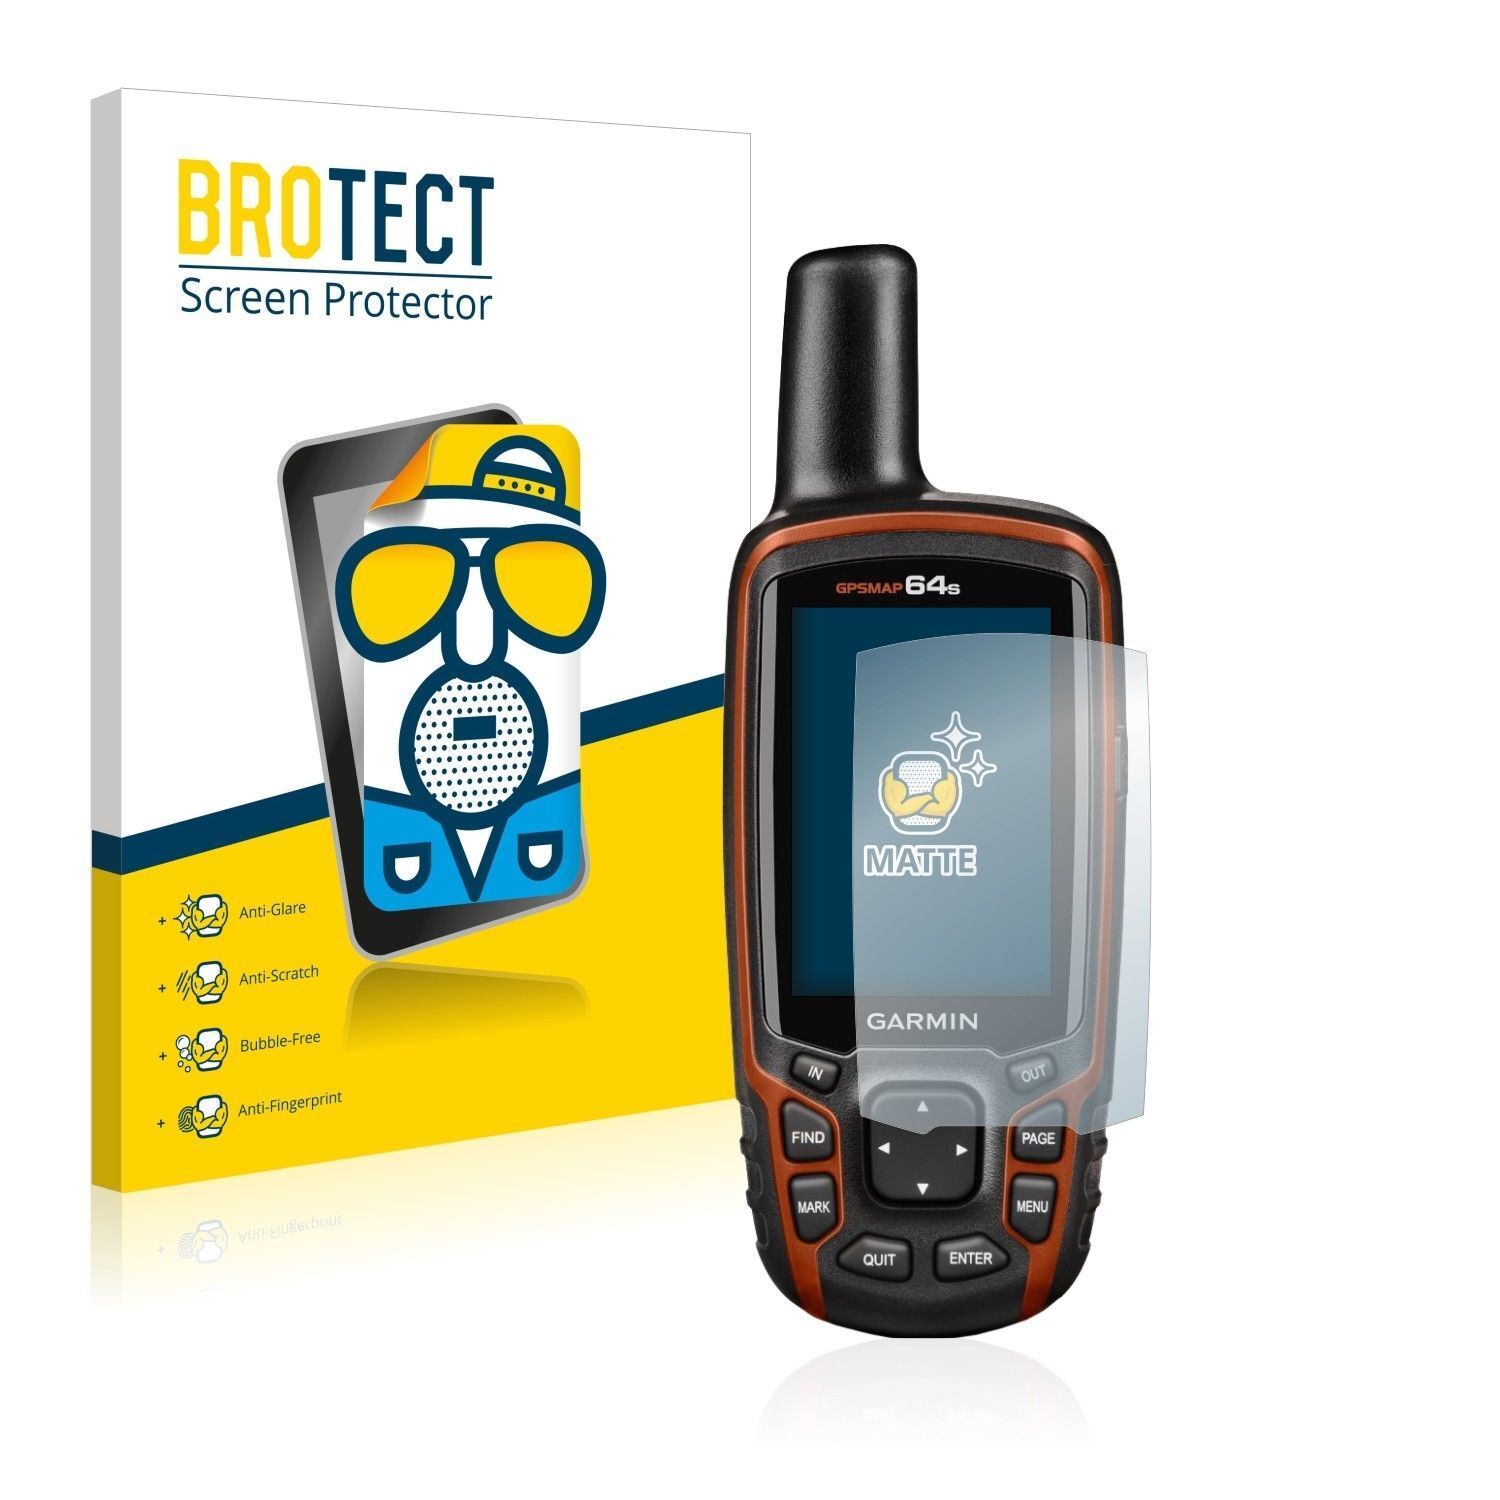 Garmin GPSMAP 62s Max 85% Mail order cheap OFF Hand Held Screen 2x BROTECT® Protector Matte